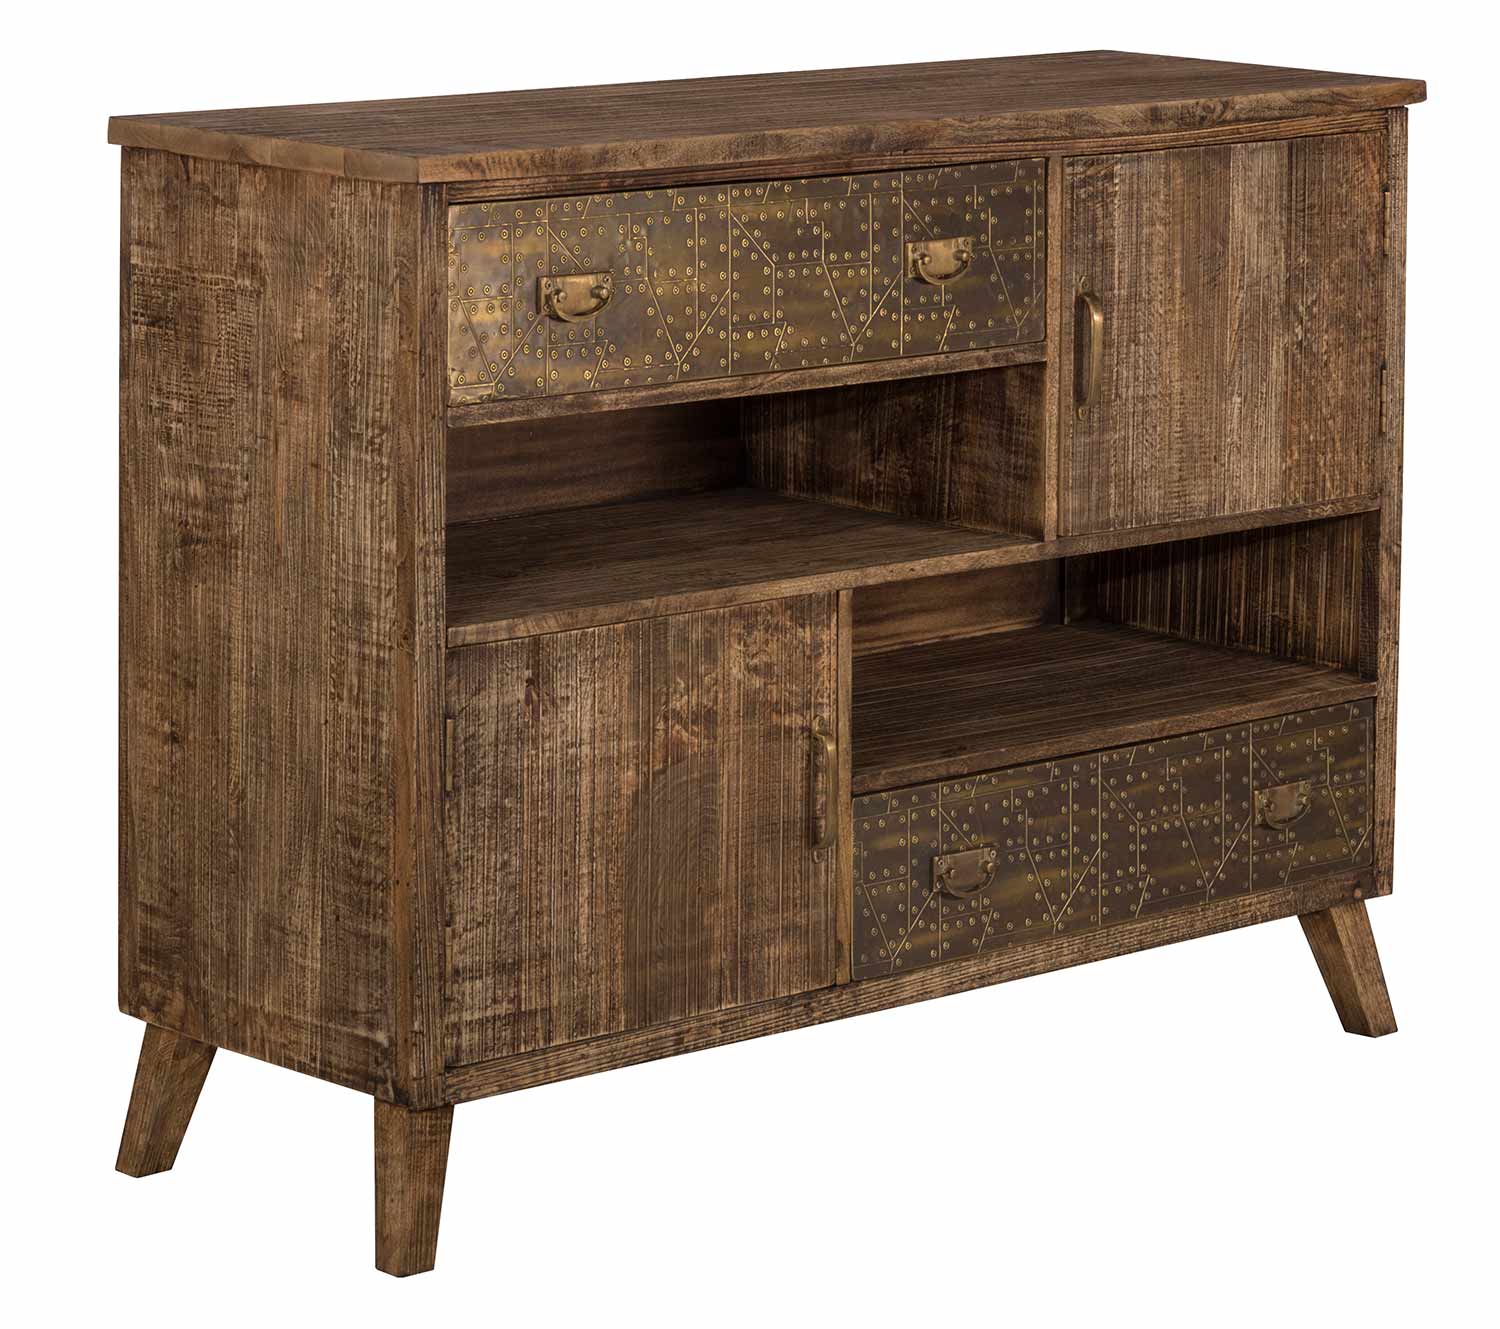 Hillsdale Lavelle 2-Door and Drawers Cabinet - Rough Sewn Oak